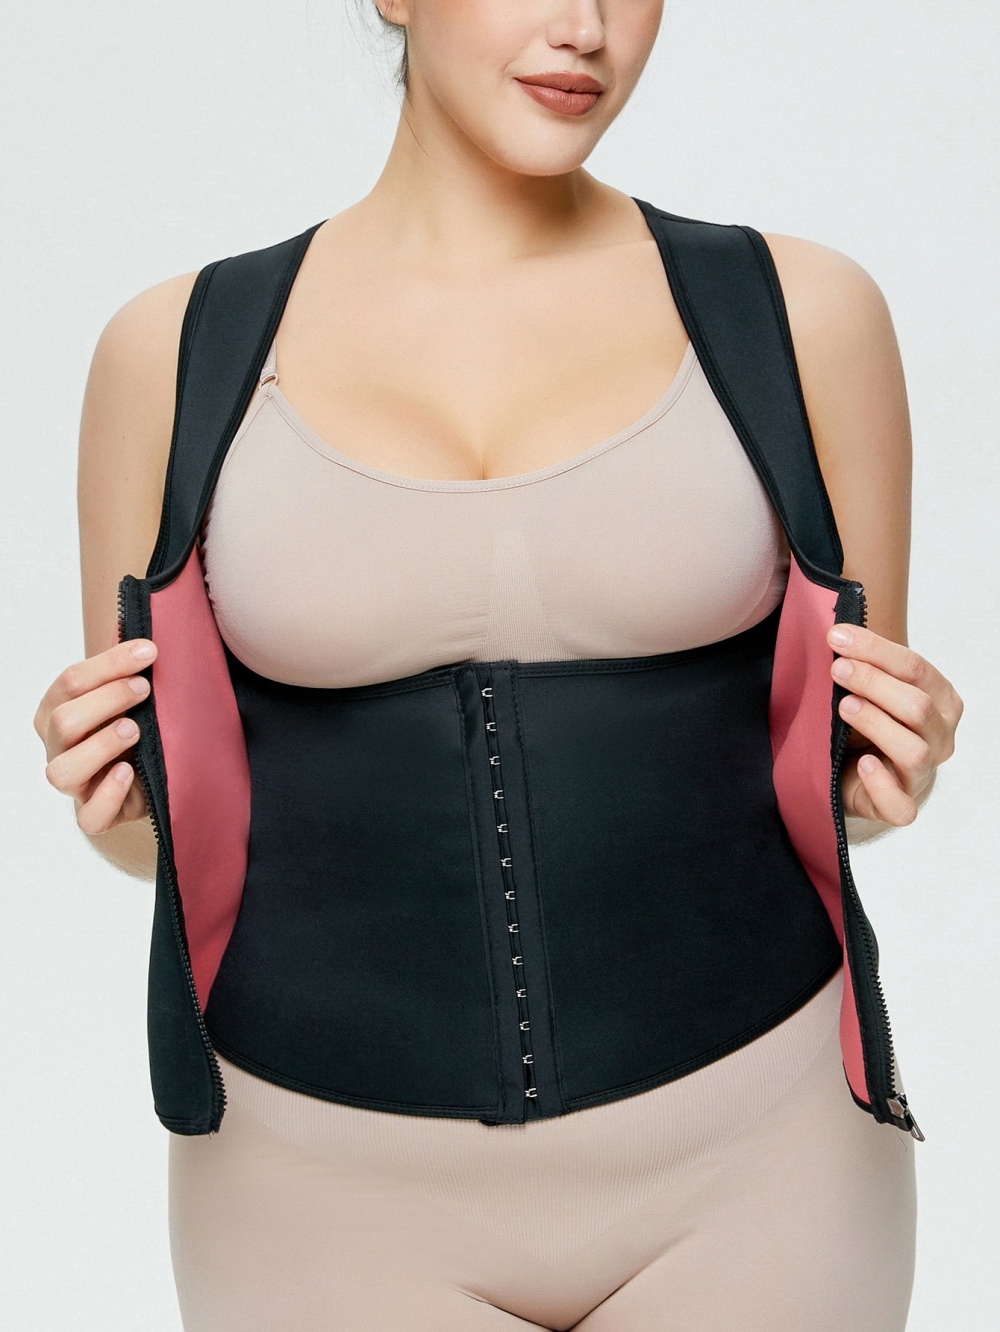 Breasted adjustable tops bound fitness shapewear